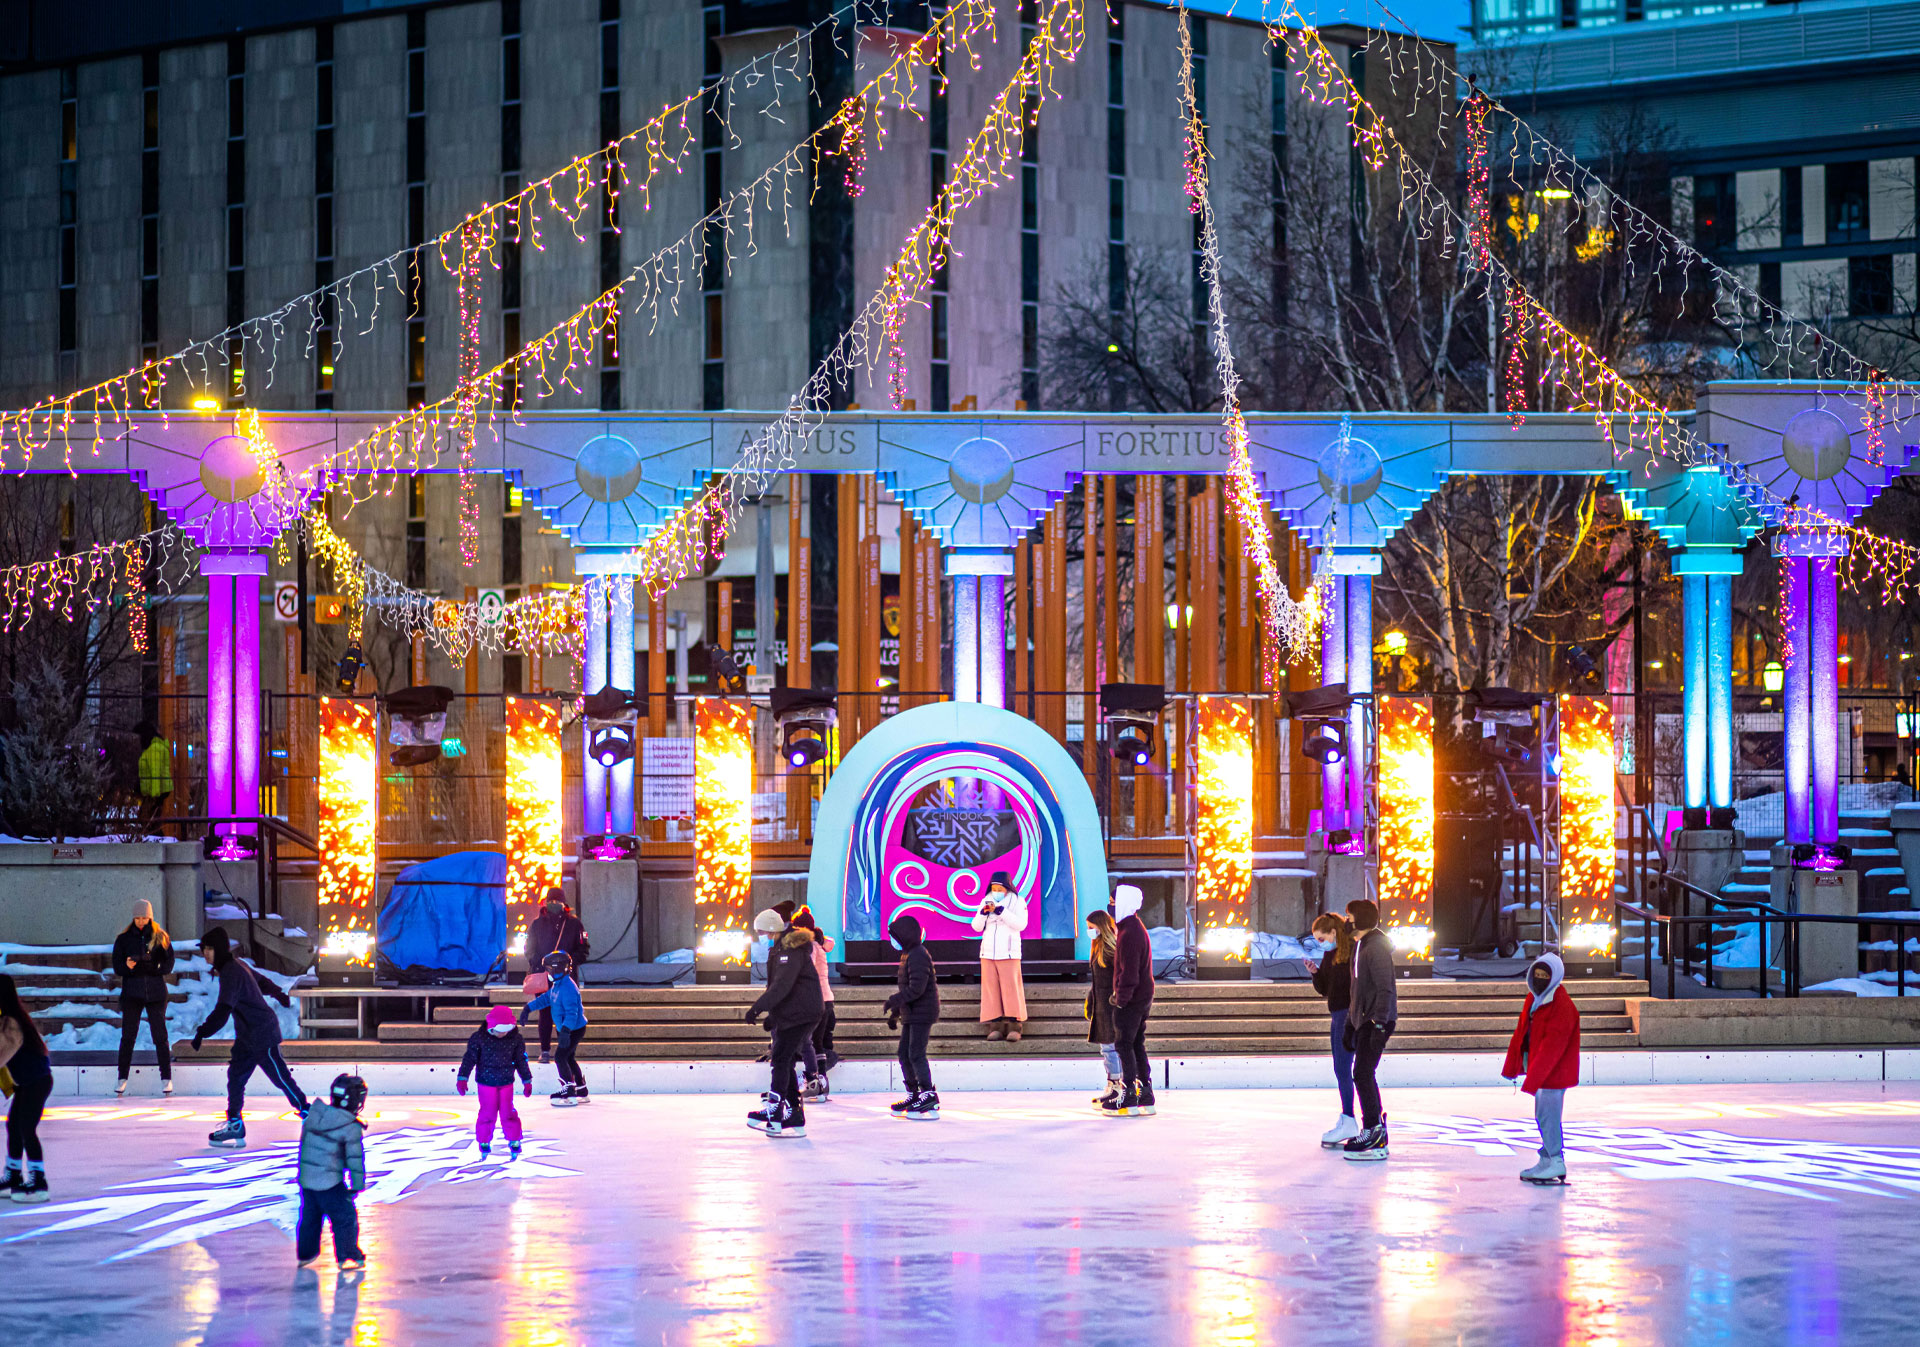 Skating at Olympic Plaza under the festival lights of Chinook Blast